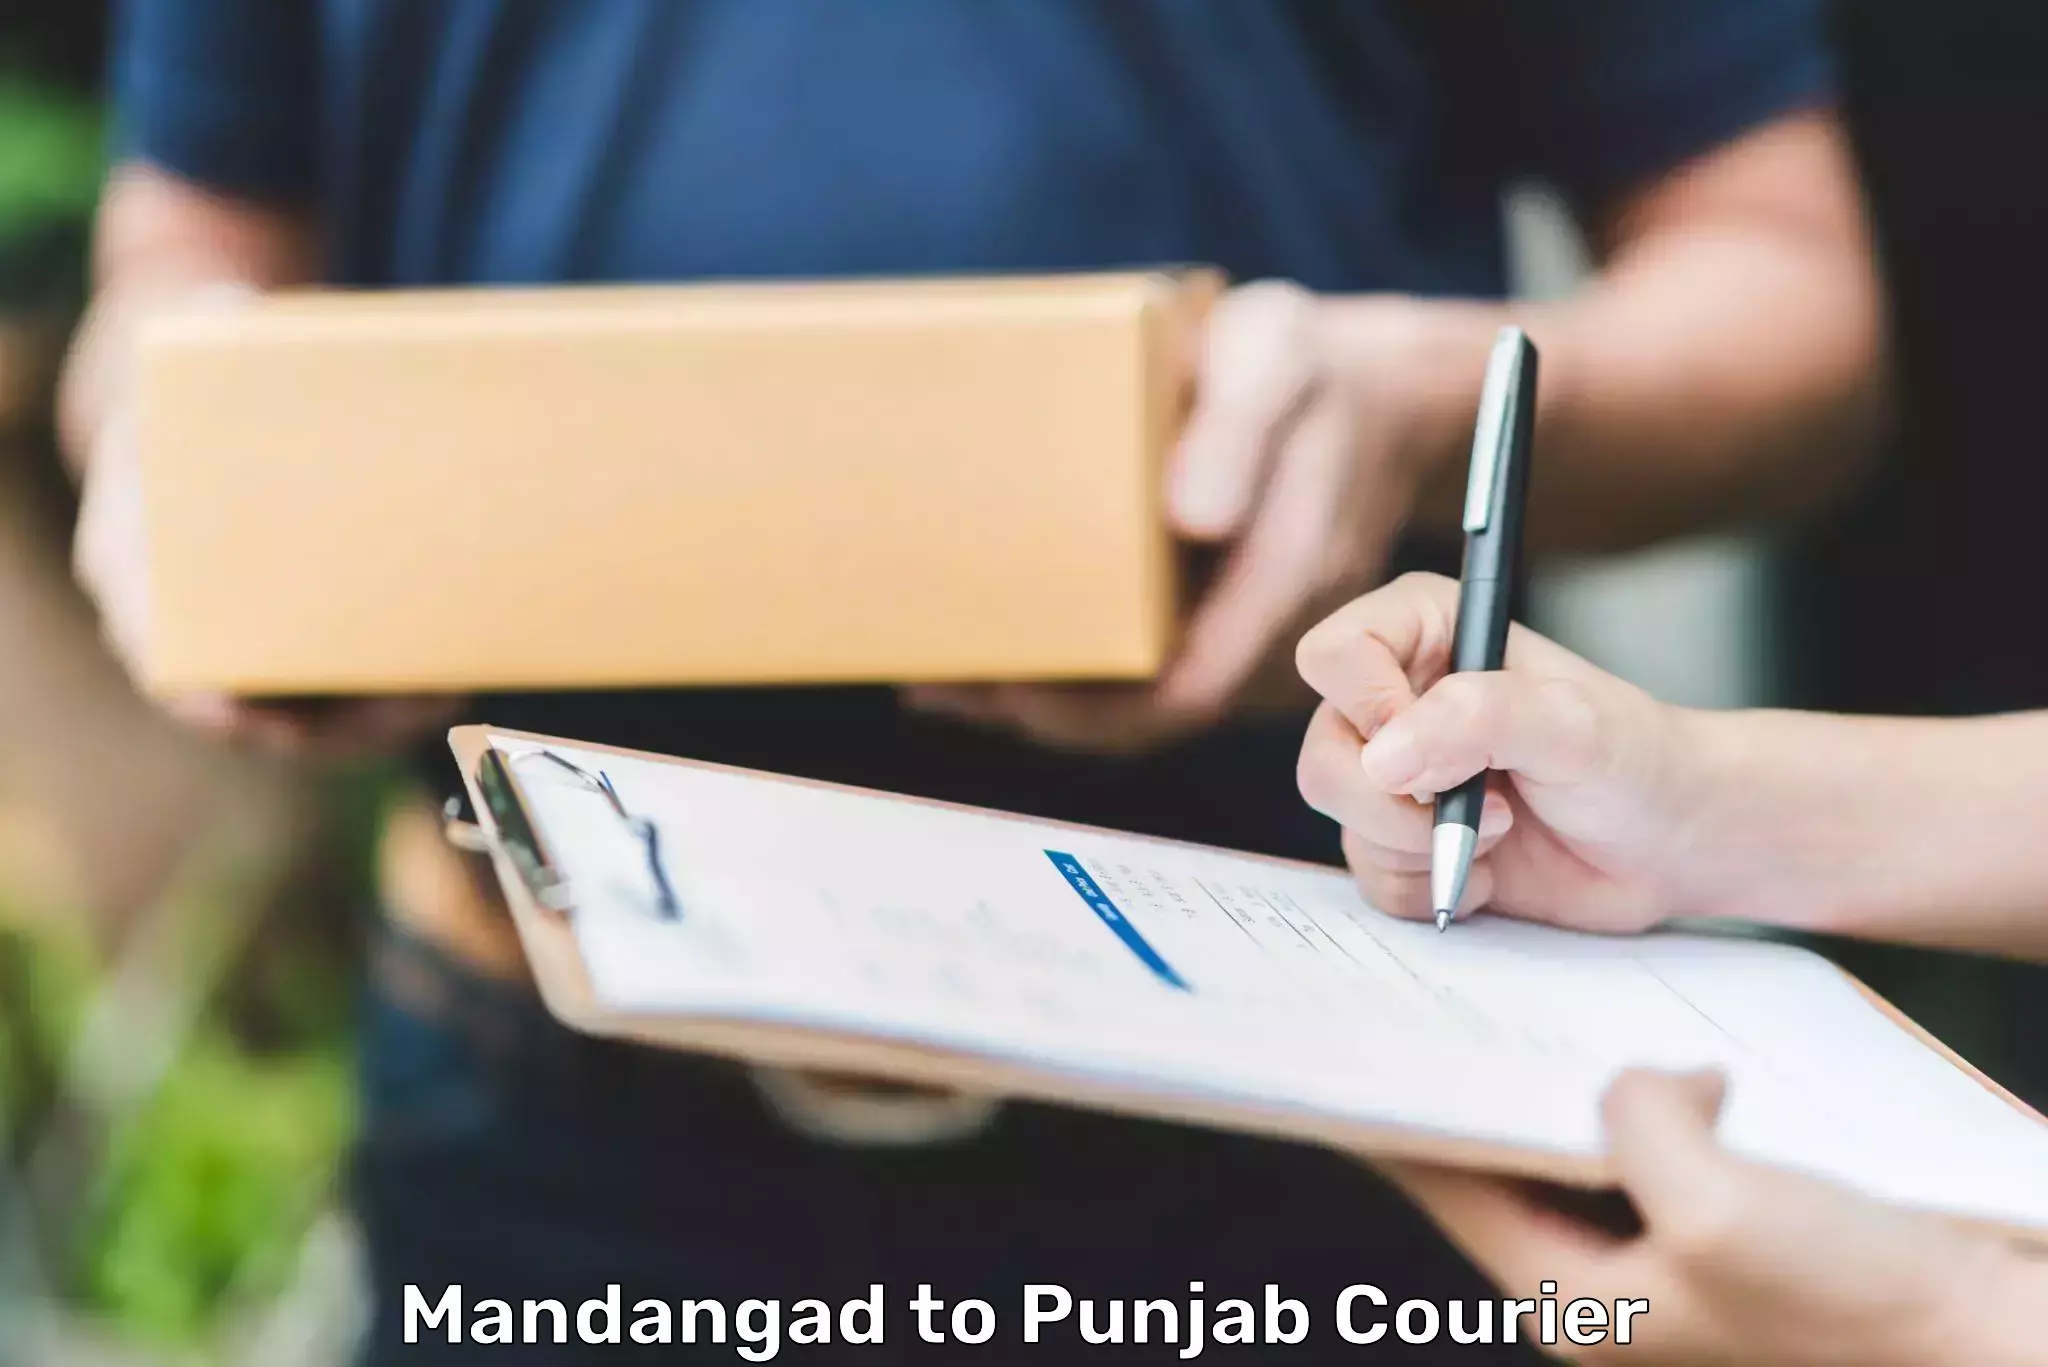 Flexible delivery schedules Mandangad to Sultanpur Lodhi